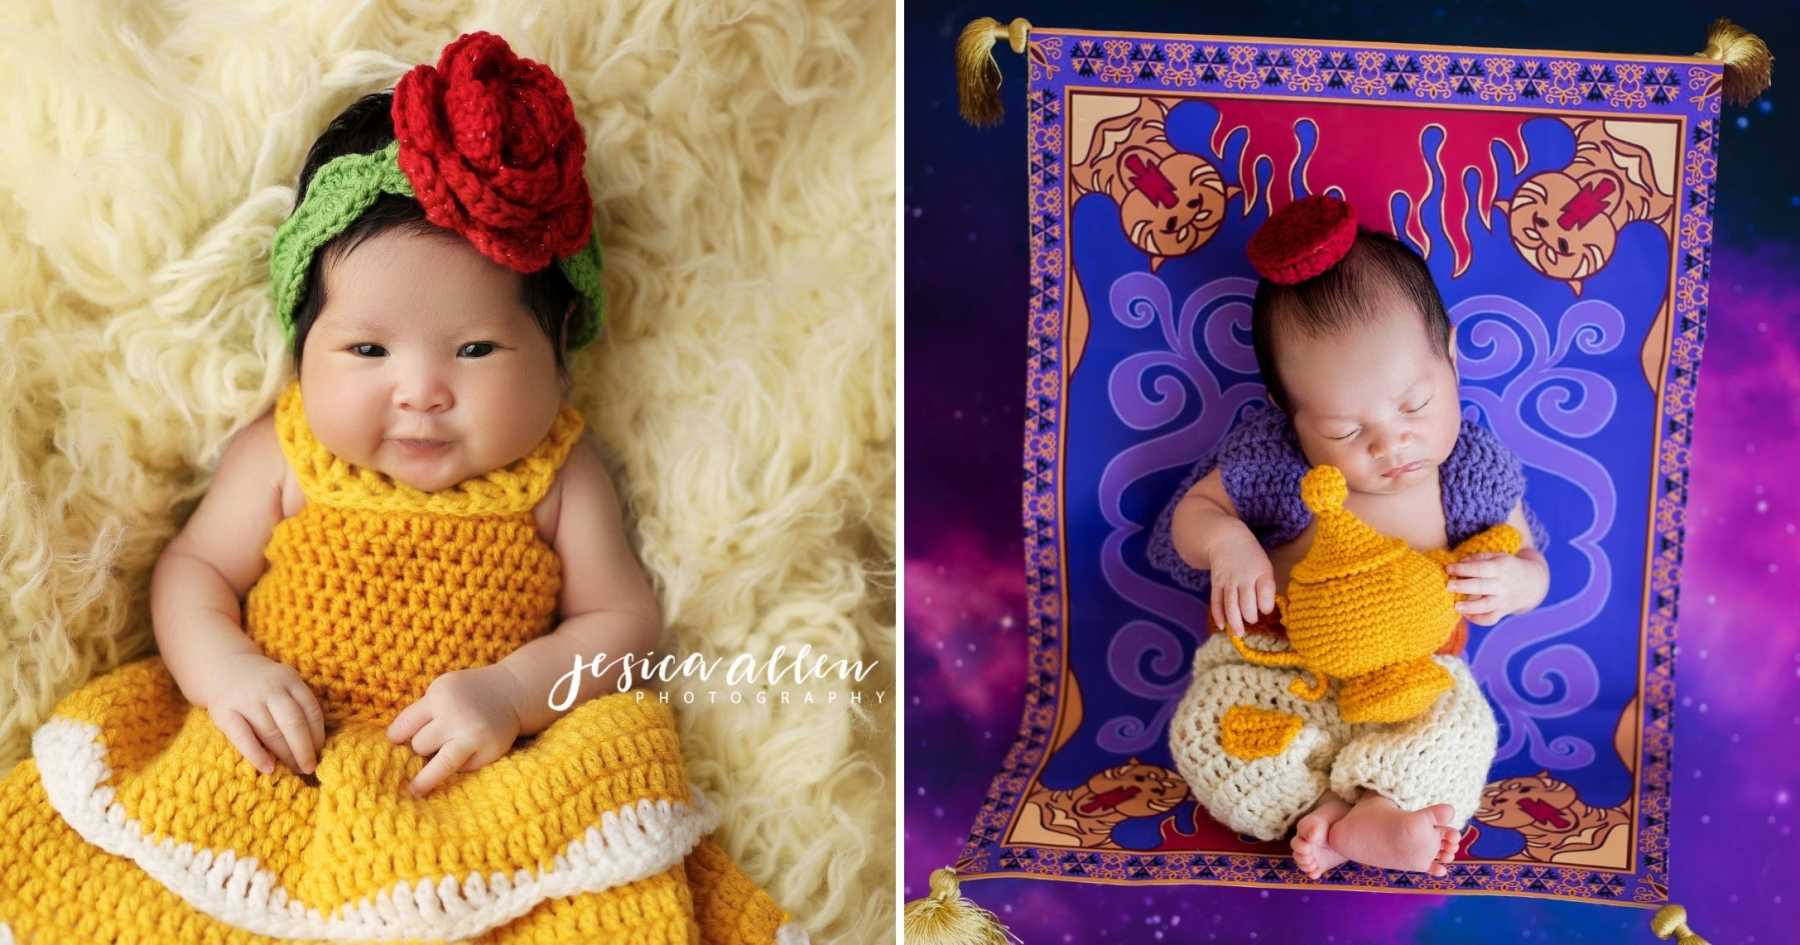 Mom Crochets Tiny Outfits To Dress Newborns As Disney Characters It S Cuteness Overload Cafemom Com